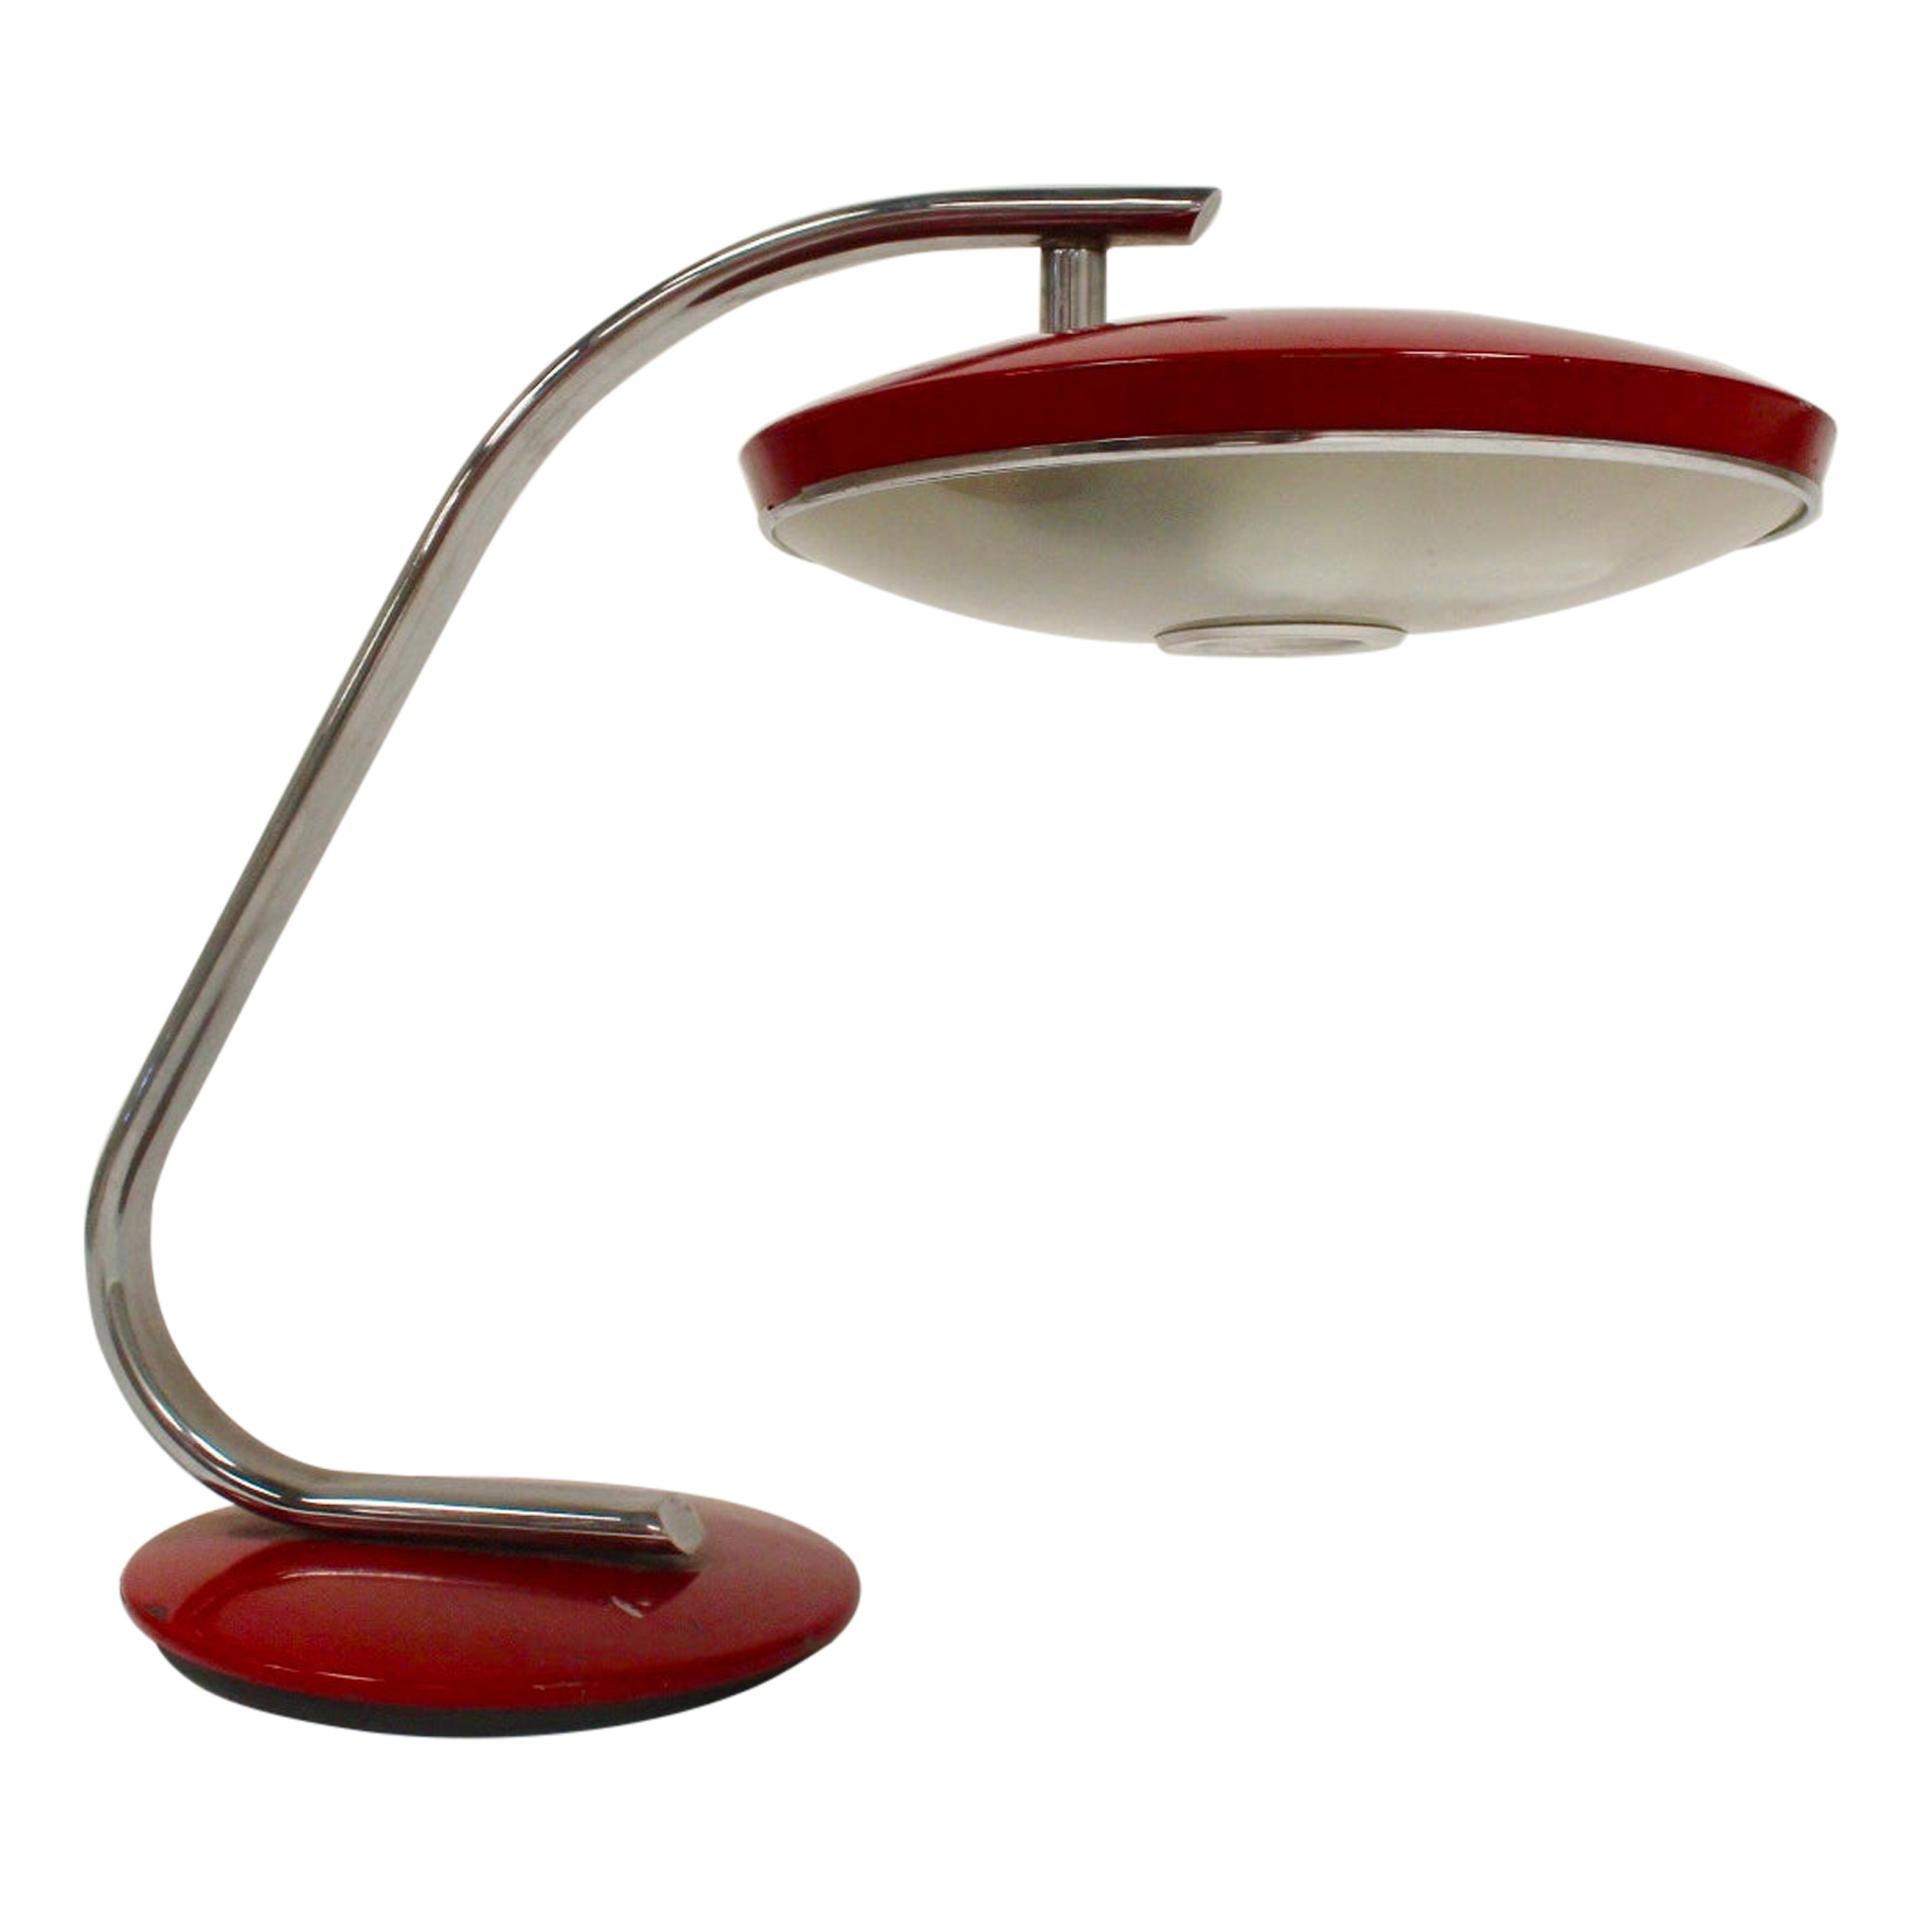 Midcentury Fase 520-C Bauhaus Design Red Articulated Desk Lamp For Sale